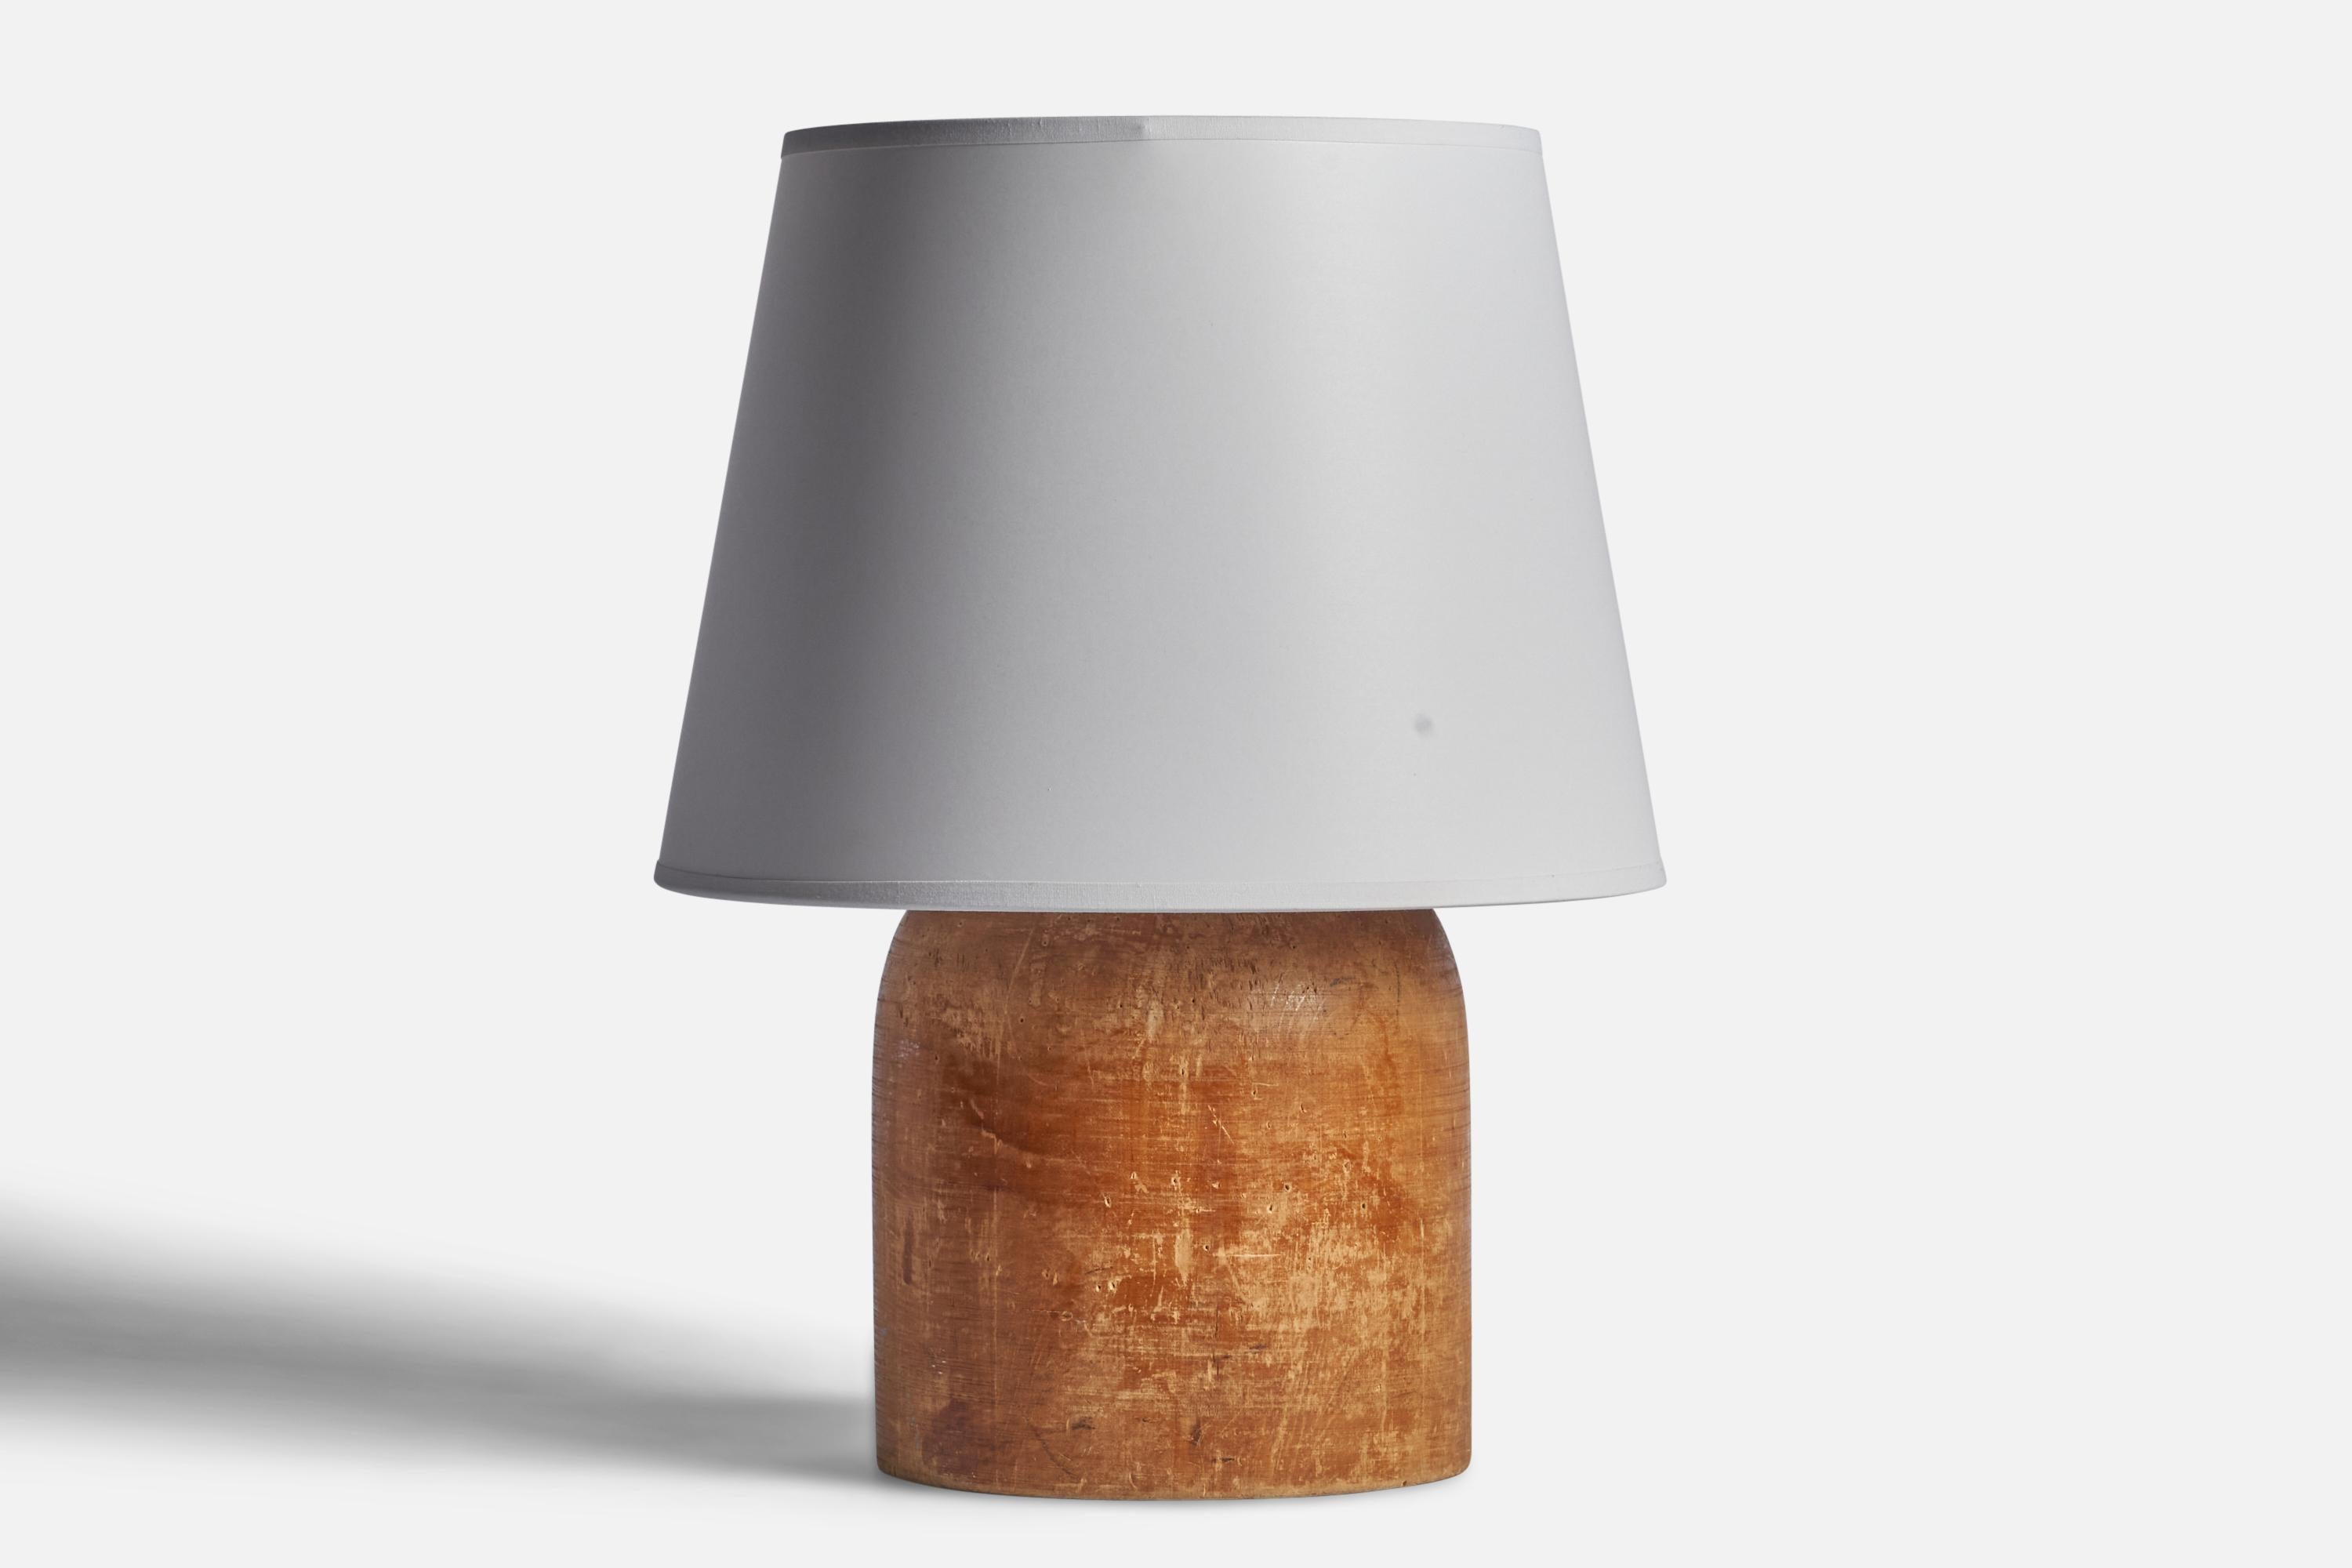 A wood table lamp designed and produced in Sweden, 1940s.

Dimensions of Lamp (inches): 11.5” H x 4.75” Diameter
Dimensions of Shade (inches): 8.75” Top Diameter x 12” Bottom Diameter x 9” H 
Dimensions of Lamp with Shade (inches): 17.5” H x 12”